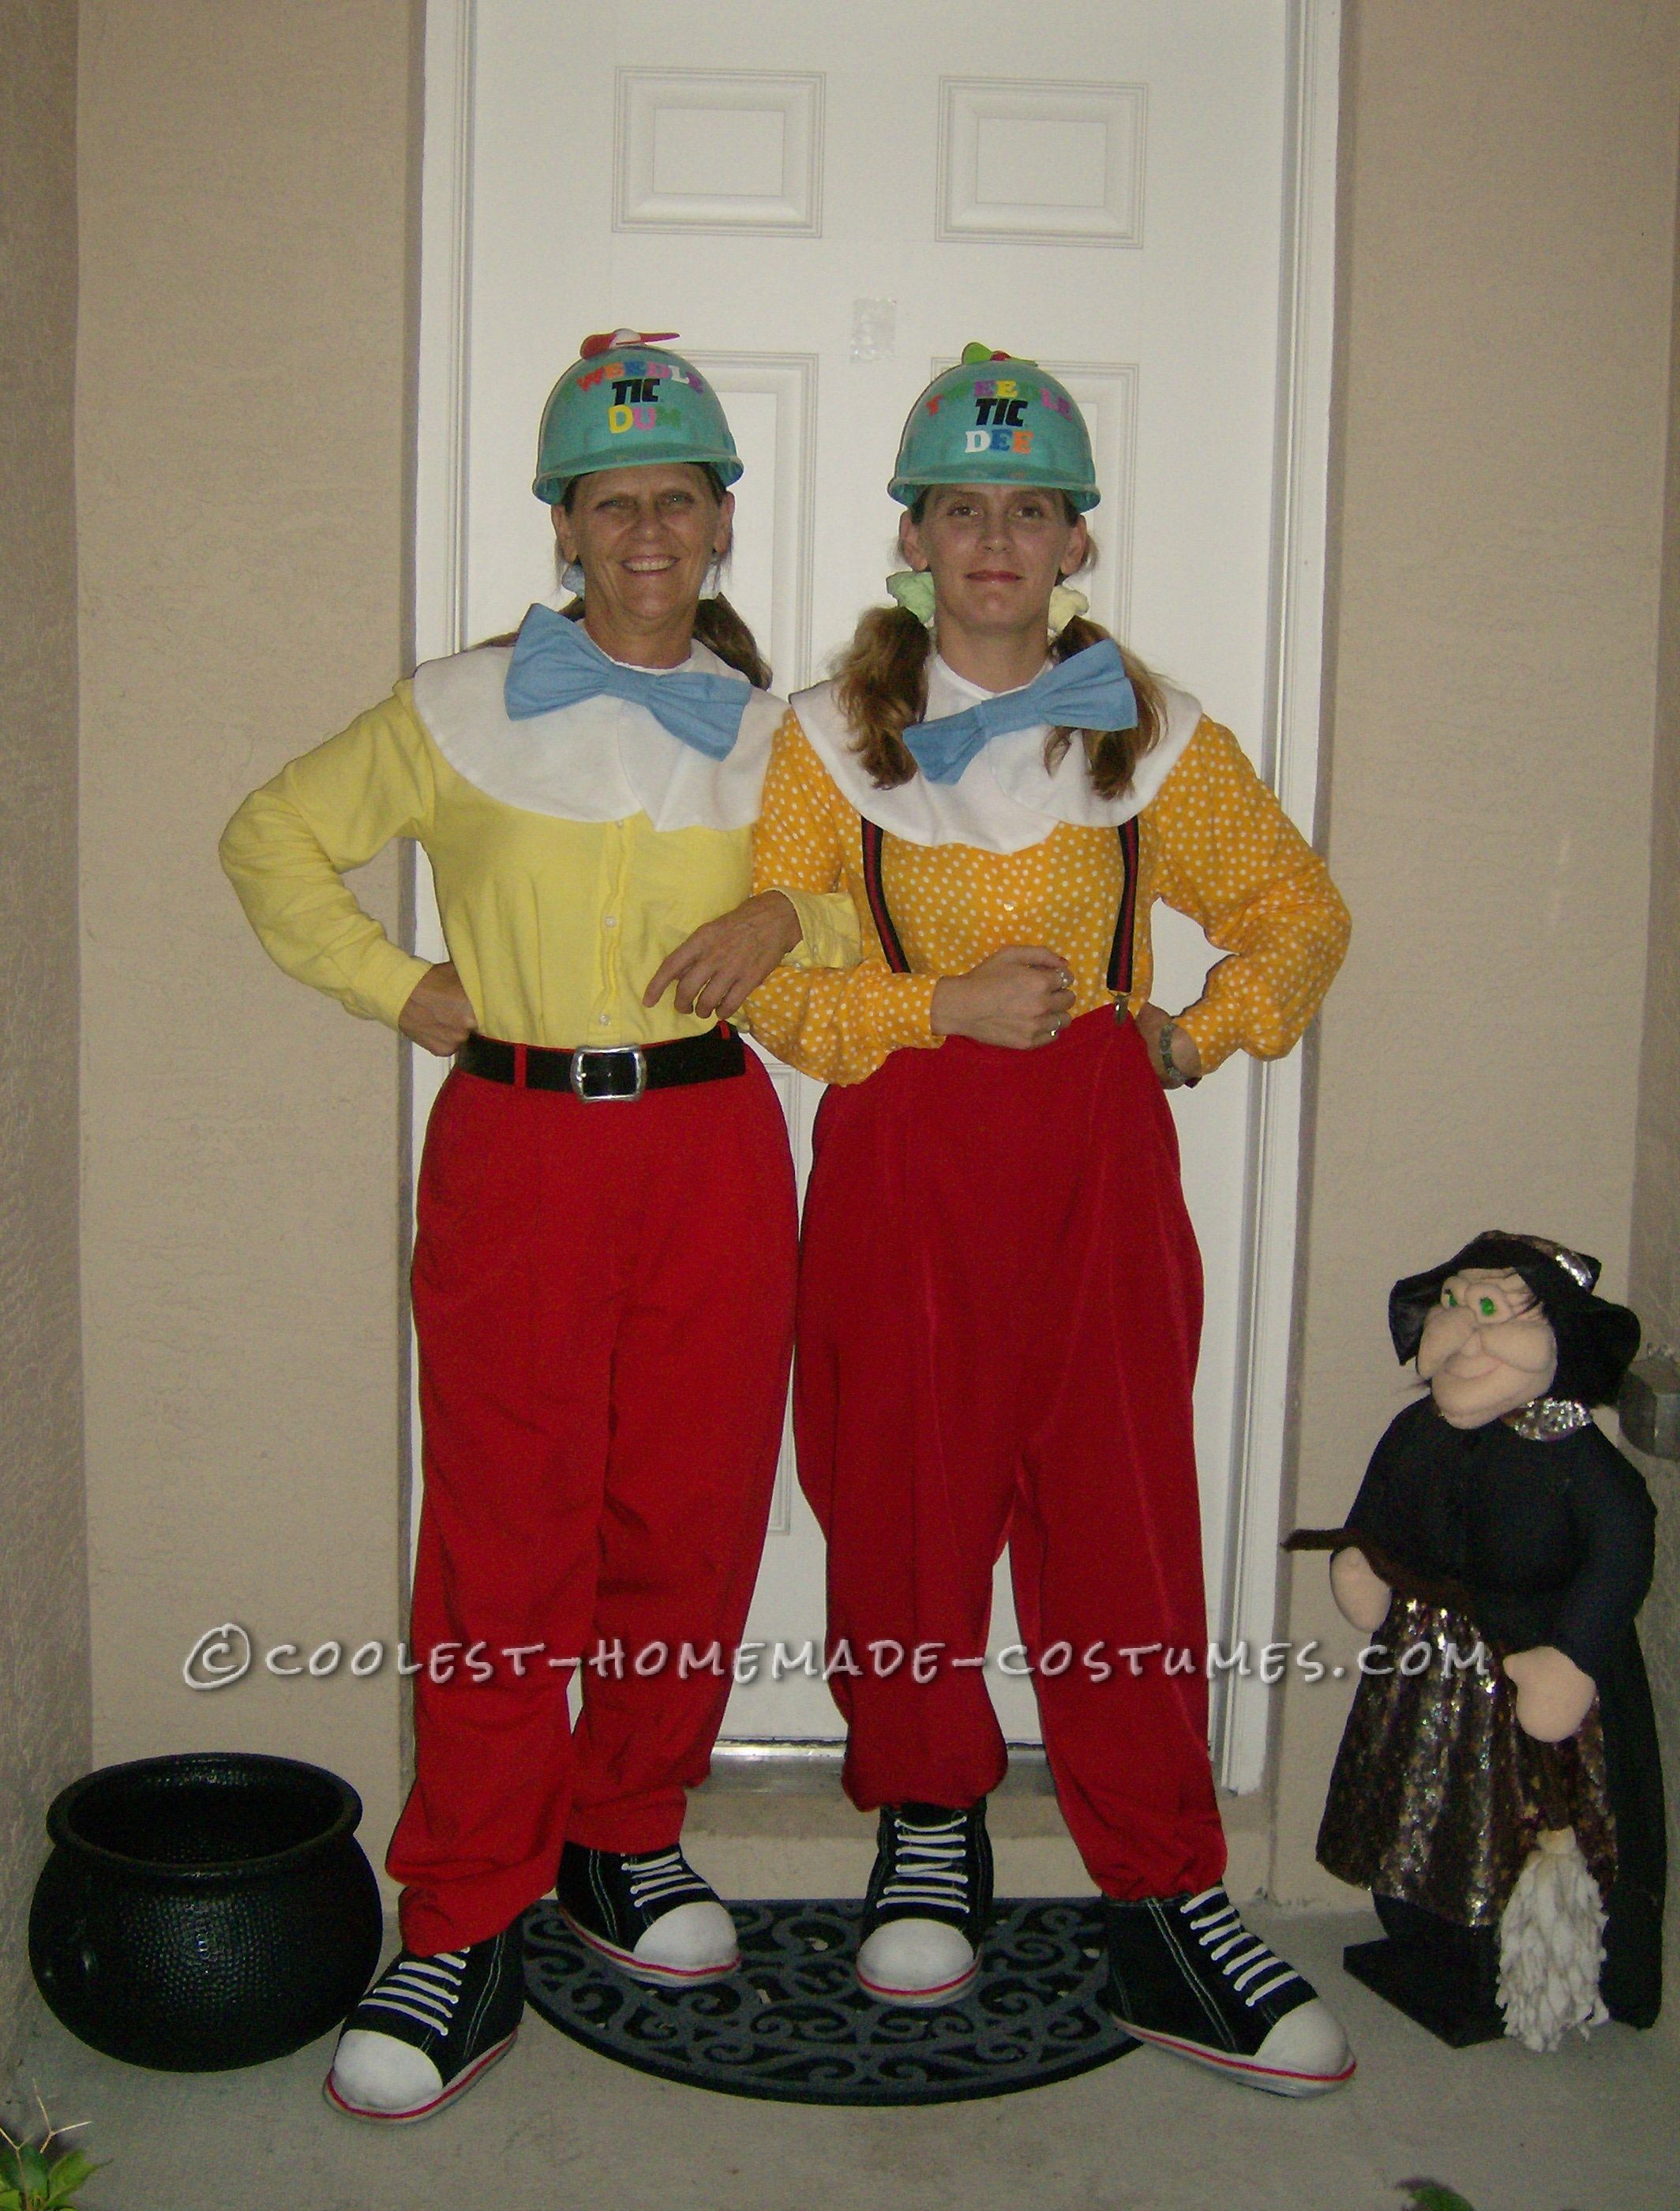 Cool Mother and Daughter Halloween Costume: Tweedle Dee and Tweedle Dumb: Of course I agreed to do these costumes with my mother on one condition....she had to be Tweedle Dumb! We work in industrial construction and wanted t